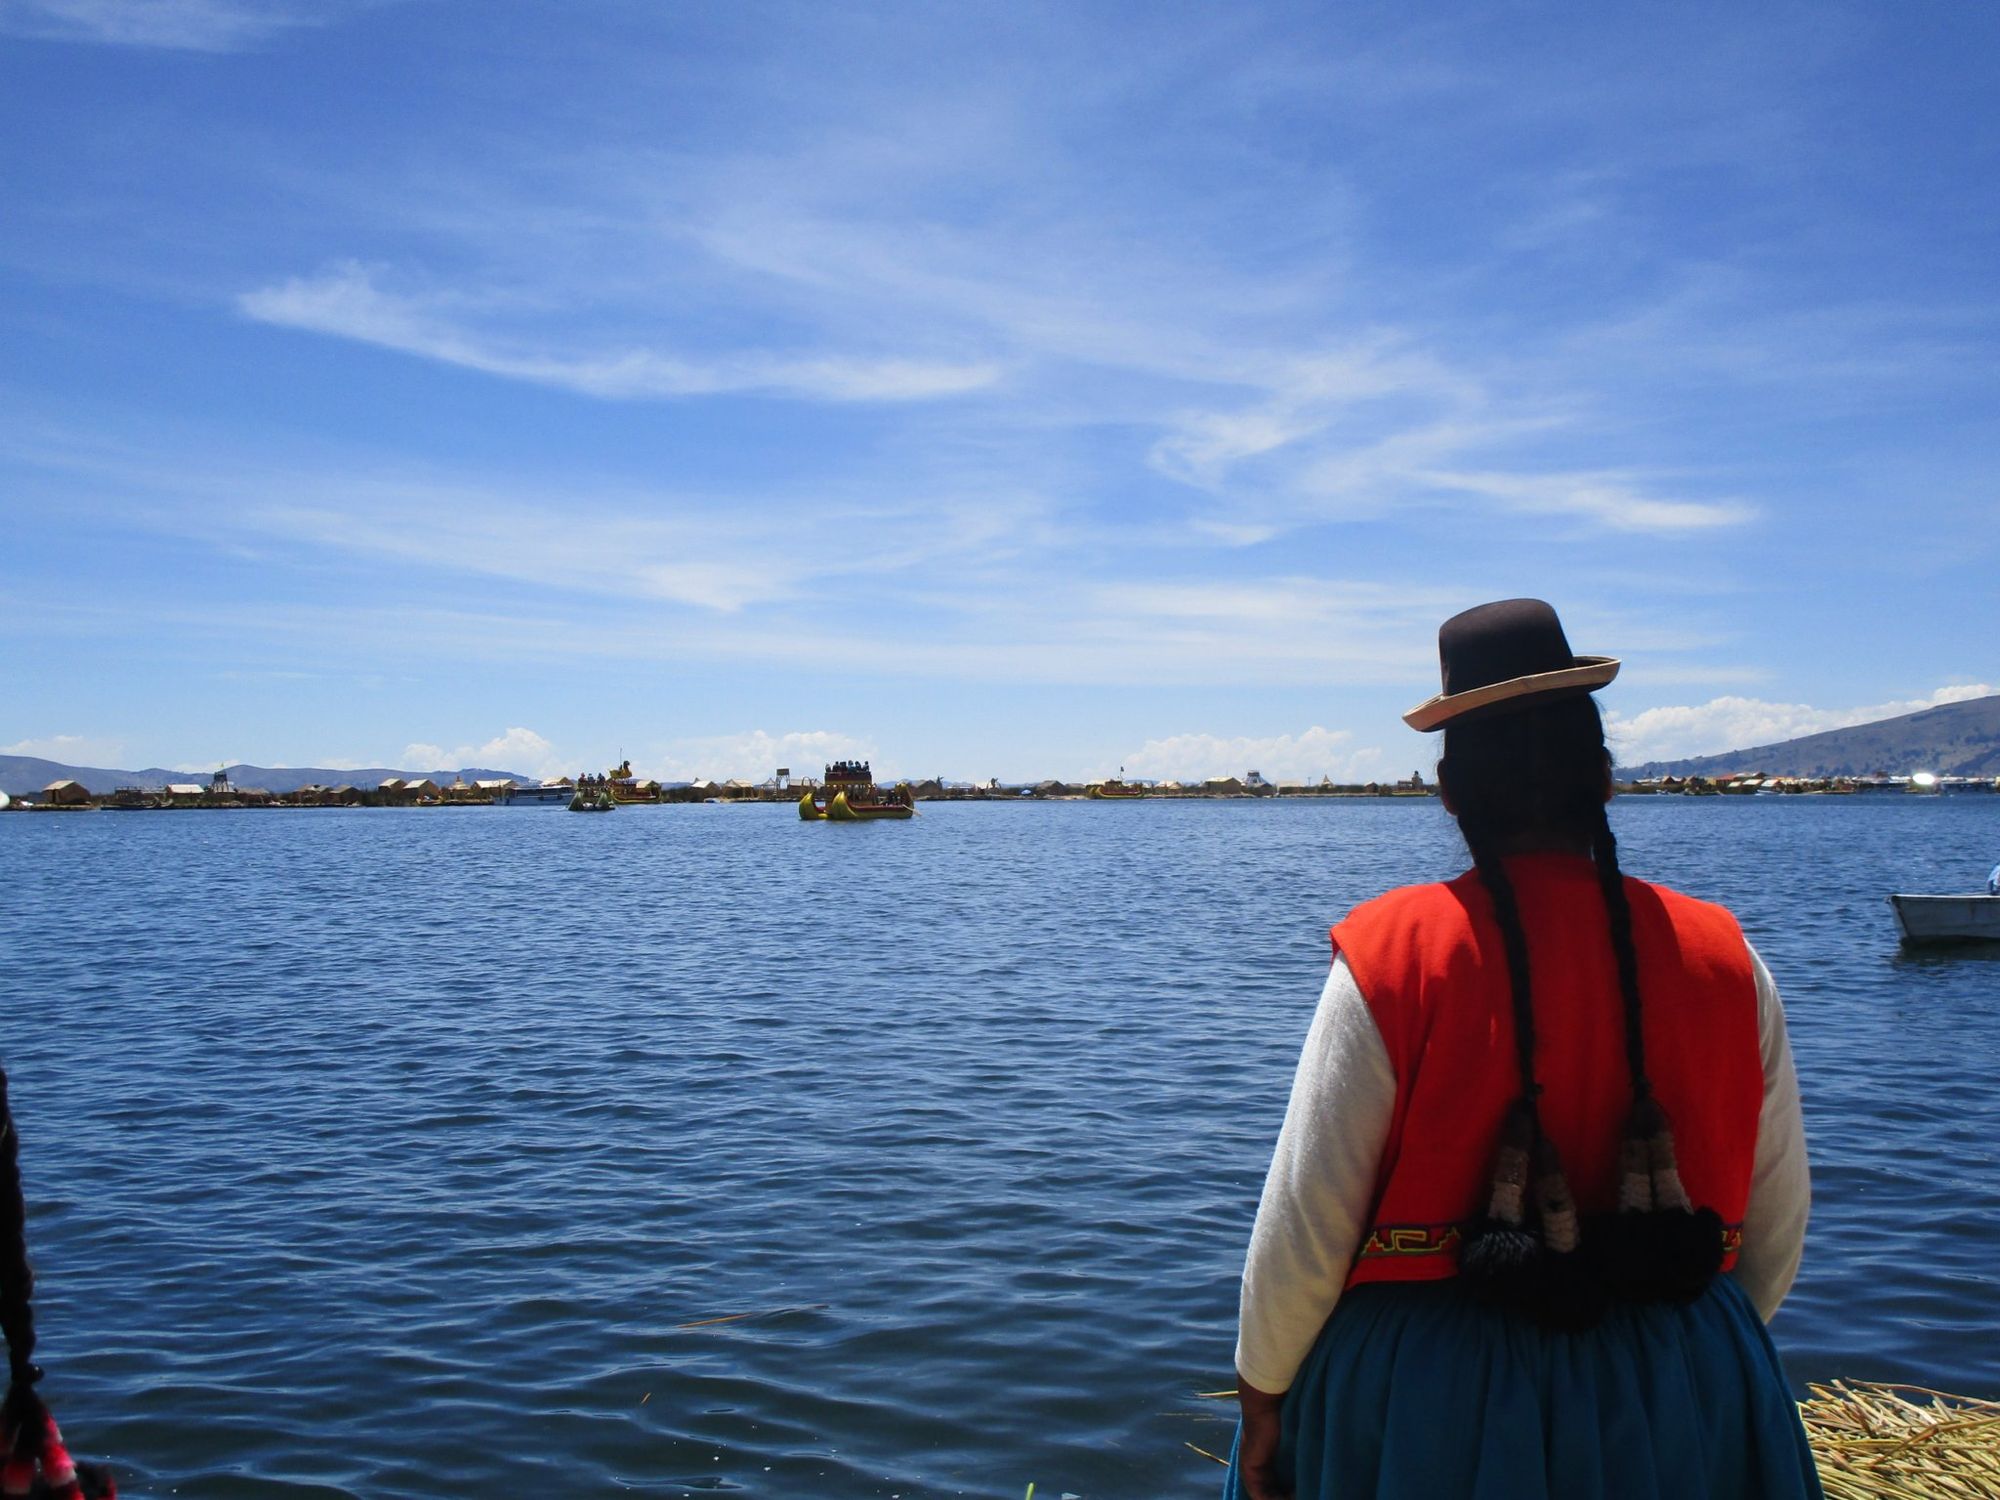 Highs and lows on Lake Titicaca